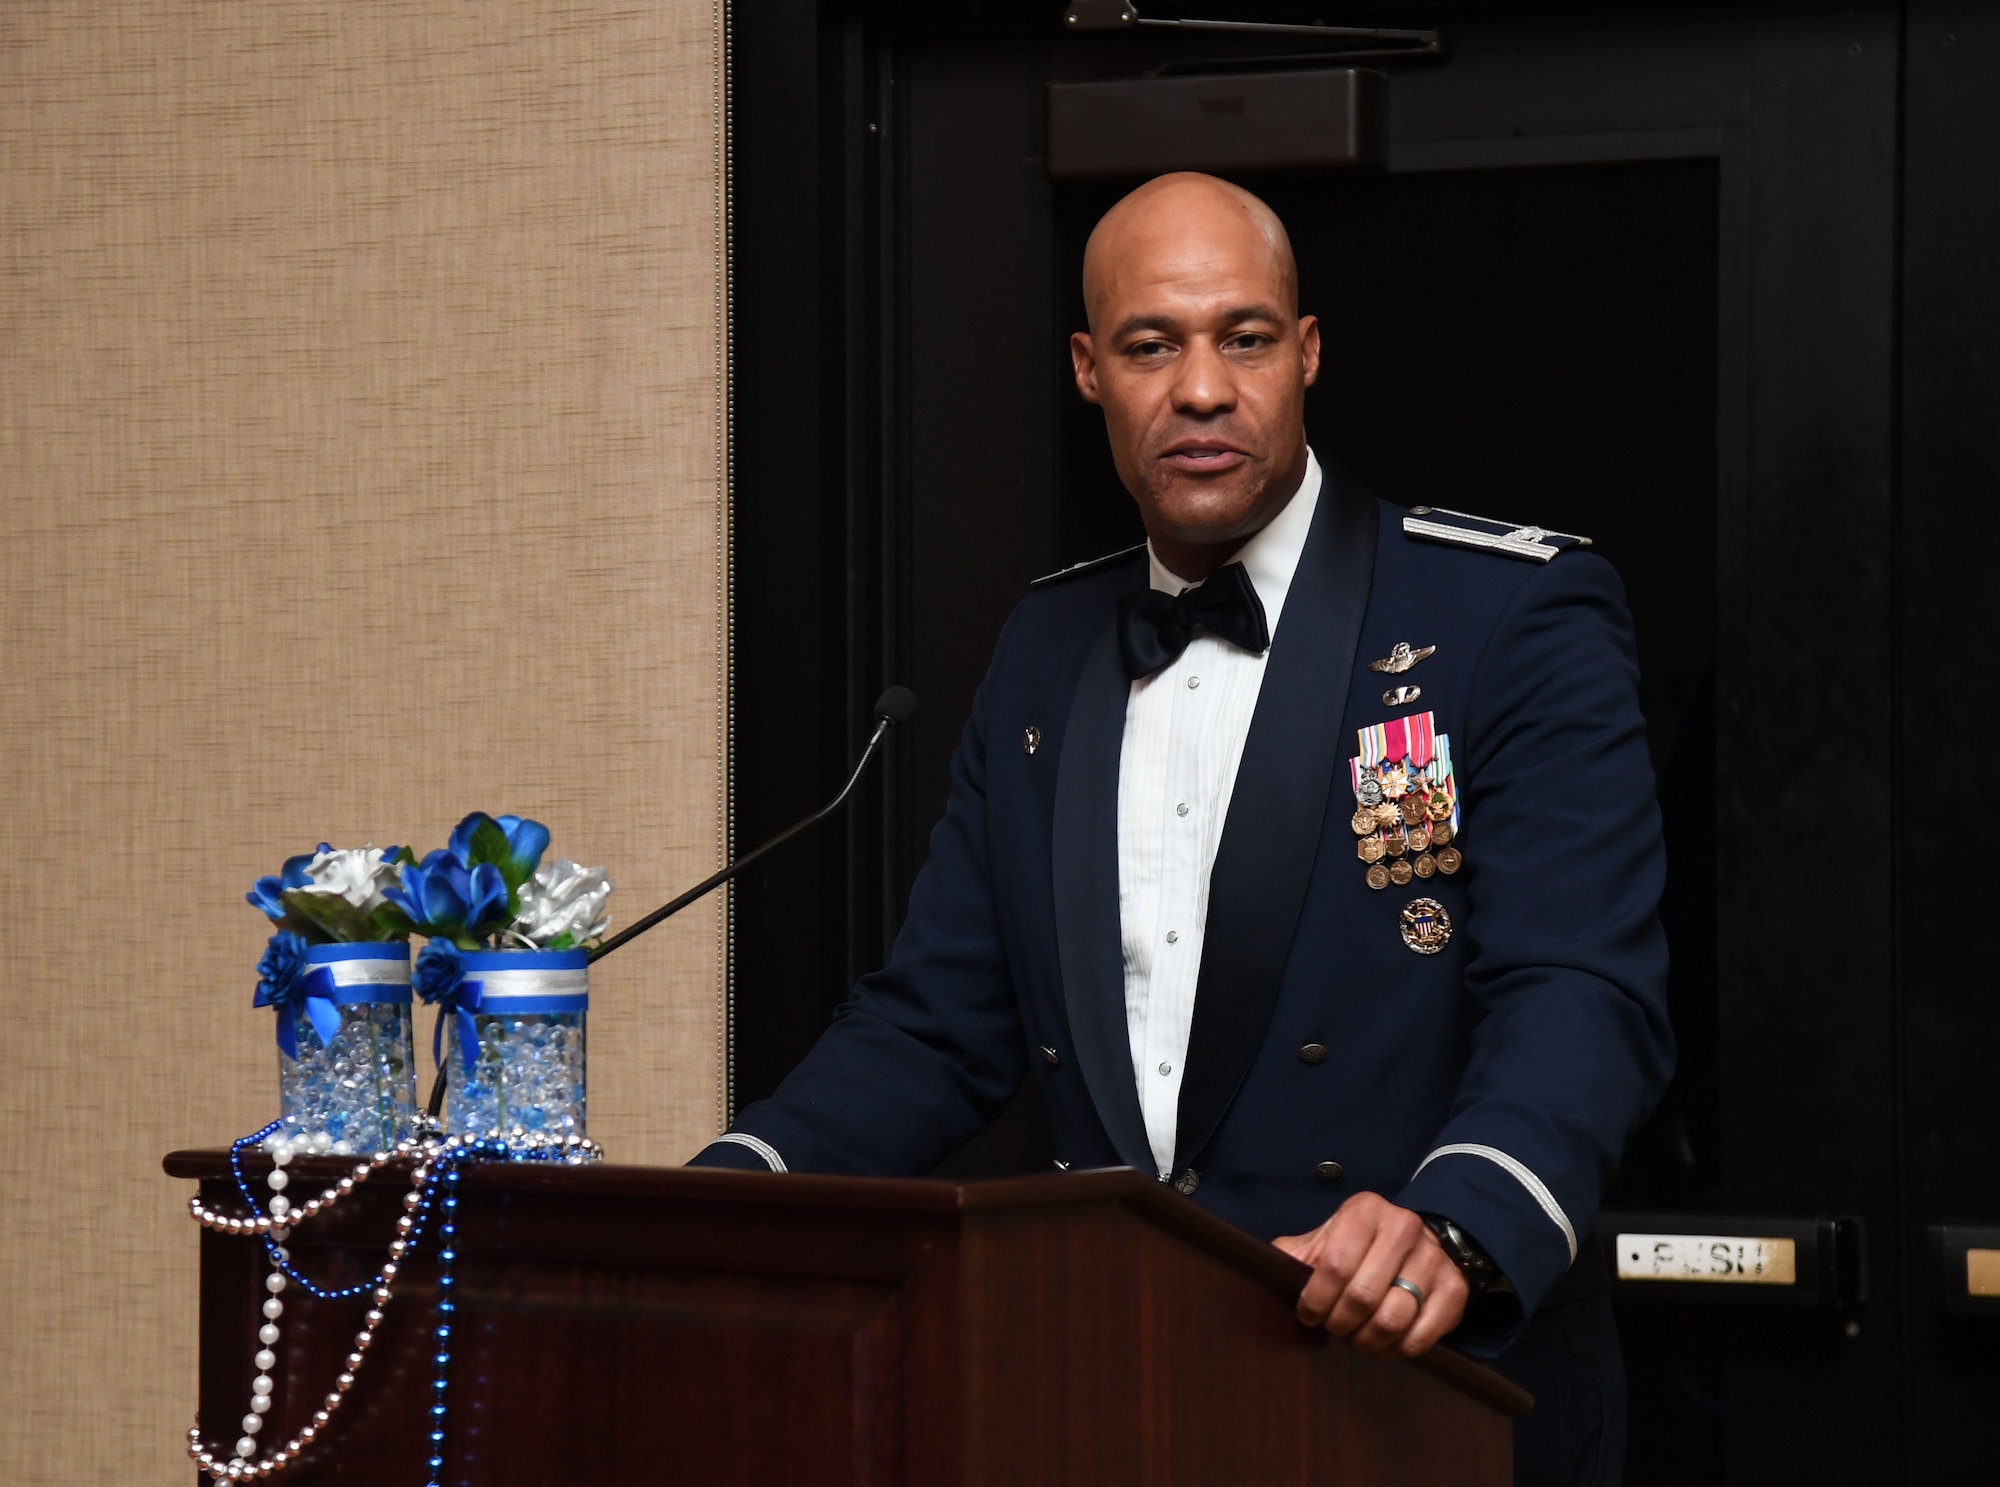 U.S. Air Force Col. Terence Taylor, 27th Special Operations Wing commander, Cannon Air Force Base, New Mexico, delivers remarks during the 81st Training Wing's 2021 Annual Awards Ceremony inside the Bay Breeze Event Center at Keesler Air Force Base, Mississippi, Feb. 17, 2022. During the ceremony, base leadership recognized outstanding Airmen and civilians from across the installation for their accomplishments throughout 2021. (U.S. Air Force photo by Kemberly Groue)